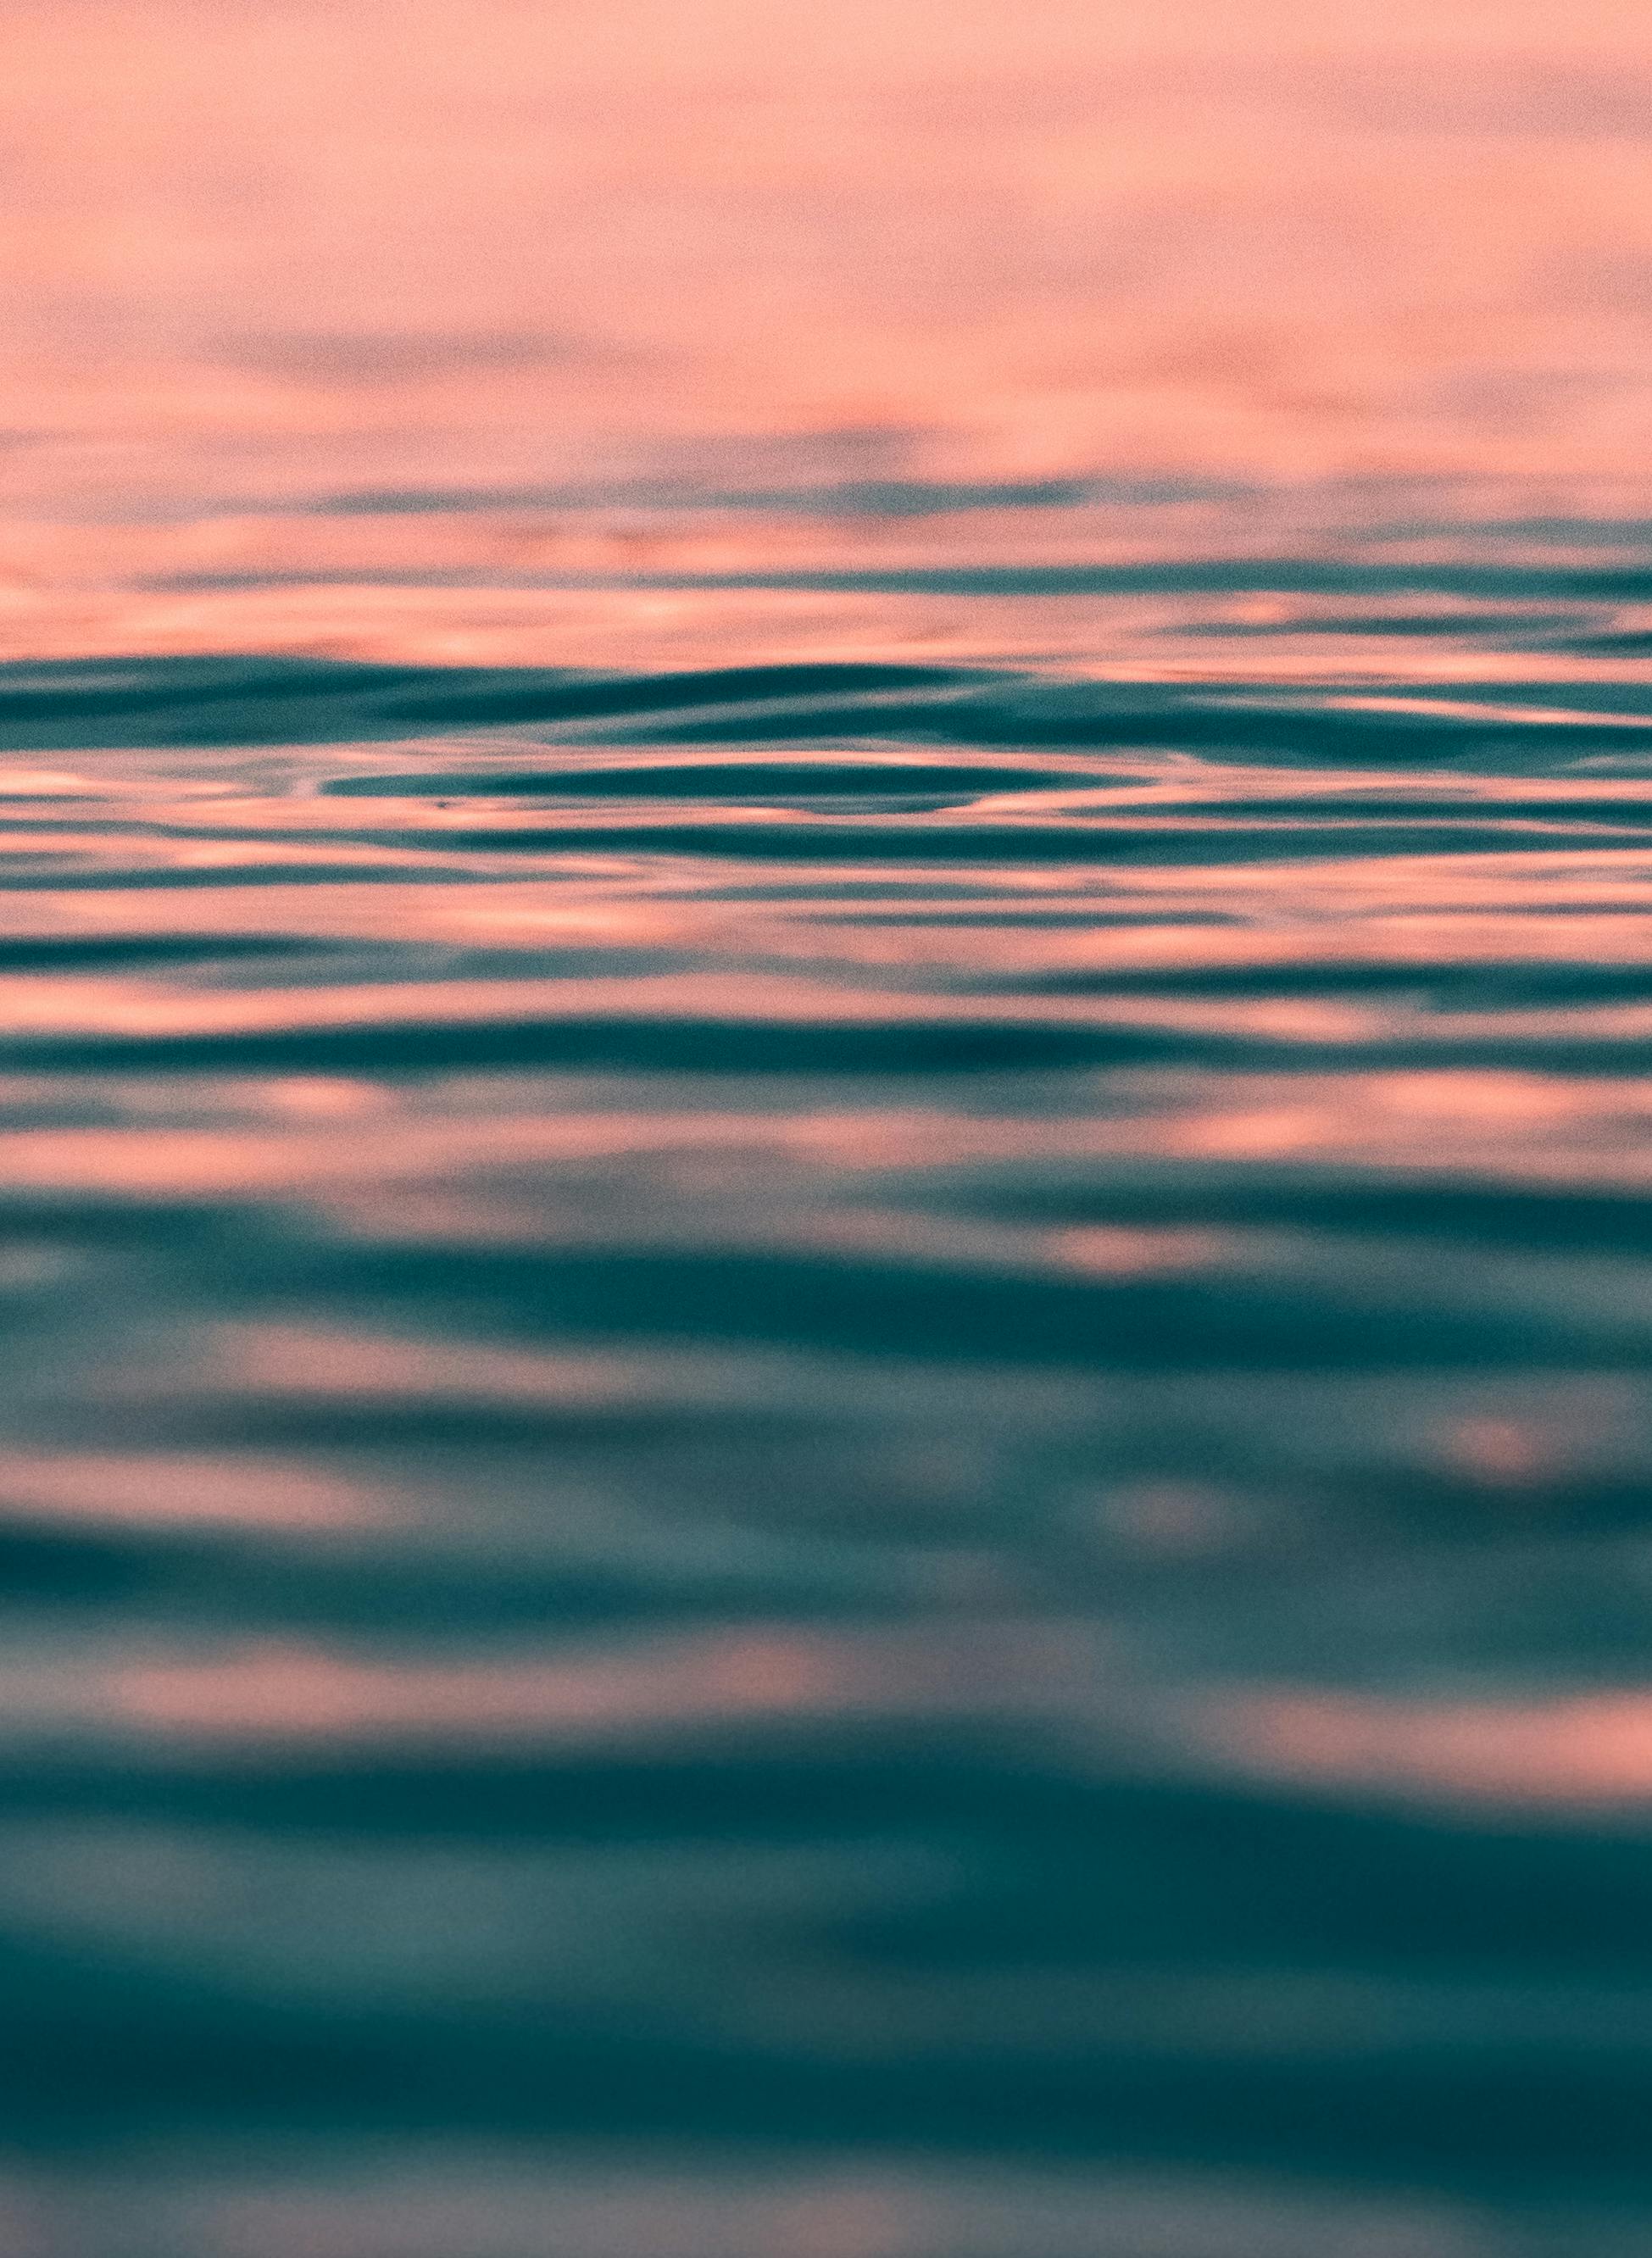 1K Iphone Water Pictures  Download Free Images on Unsplash